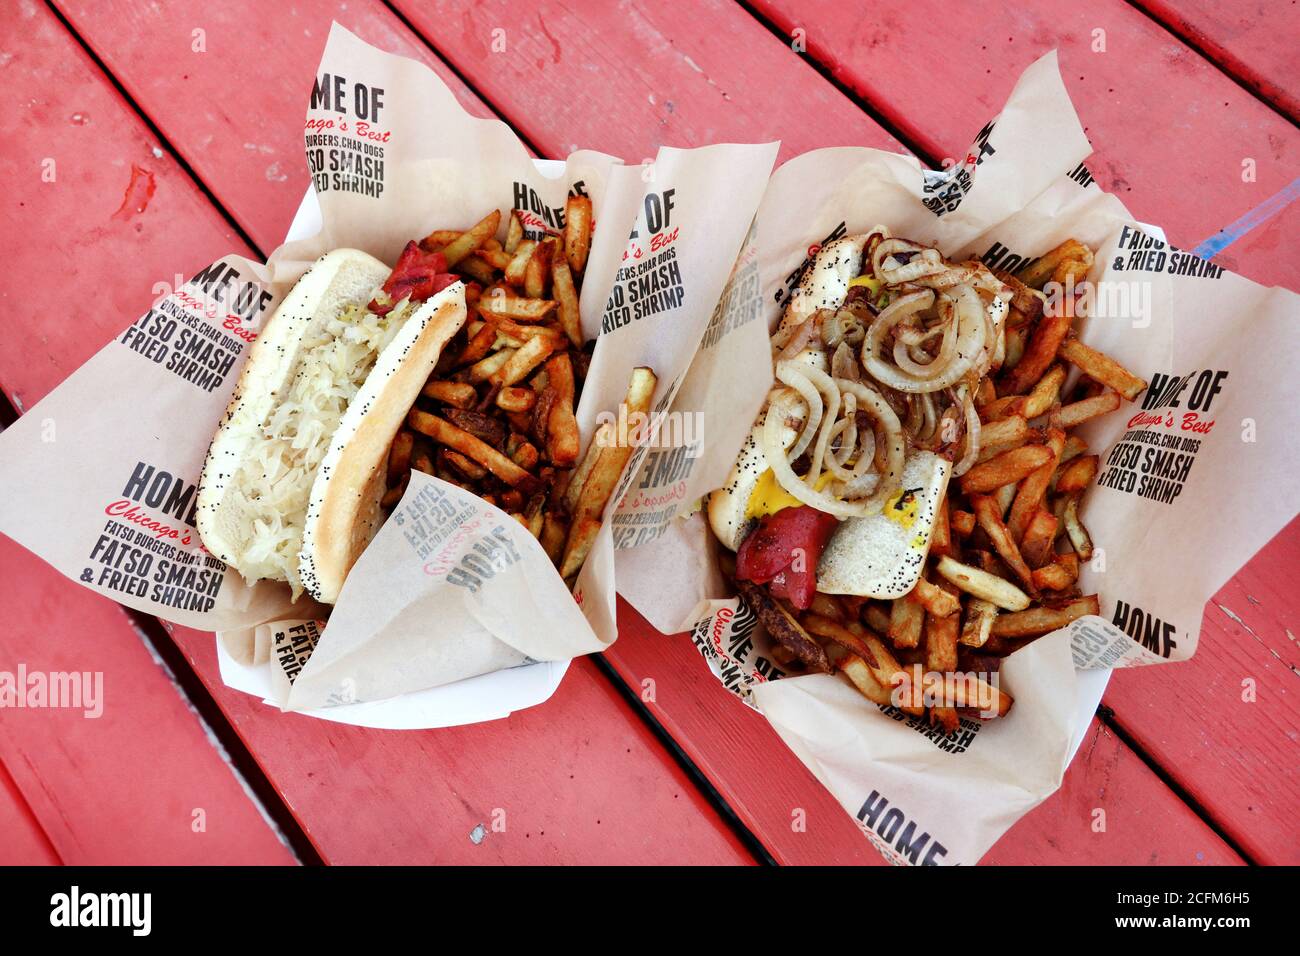 Famous Polish Hot Dogs with French Fries and Onion Rings, Chicago, USA Stock Photo